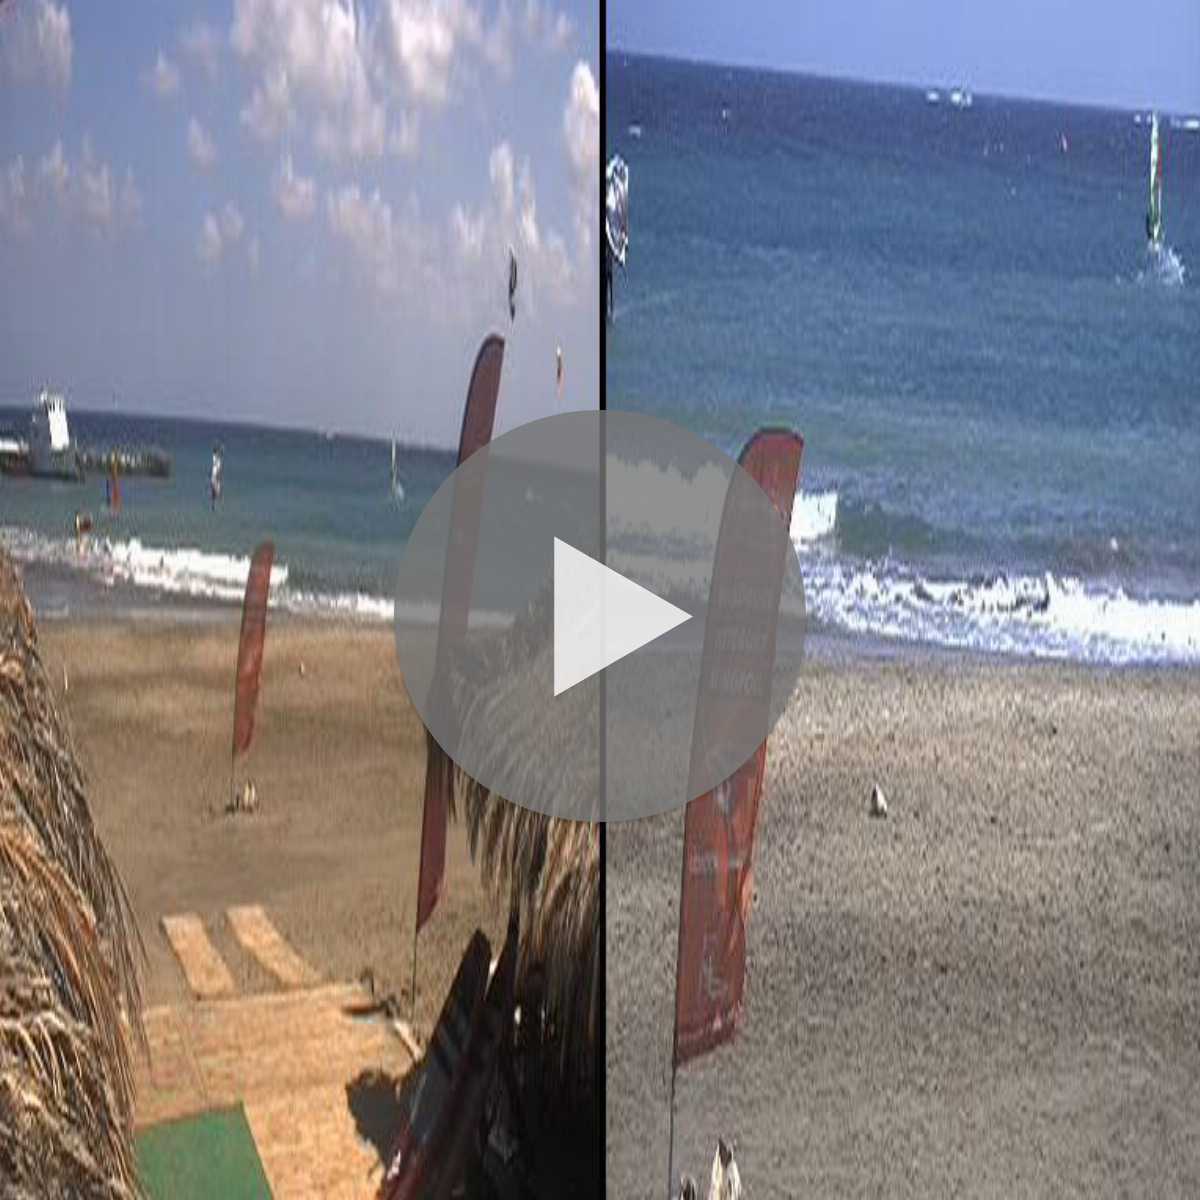 The Best Egypt Webcams Hd Live 24 7